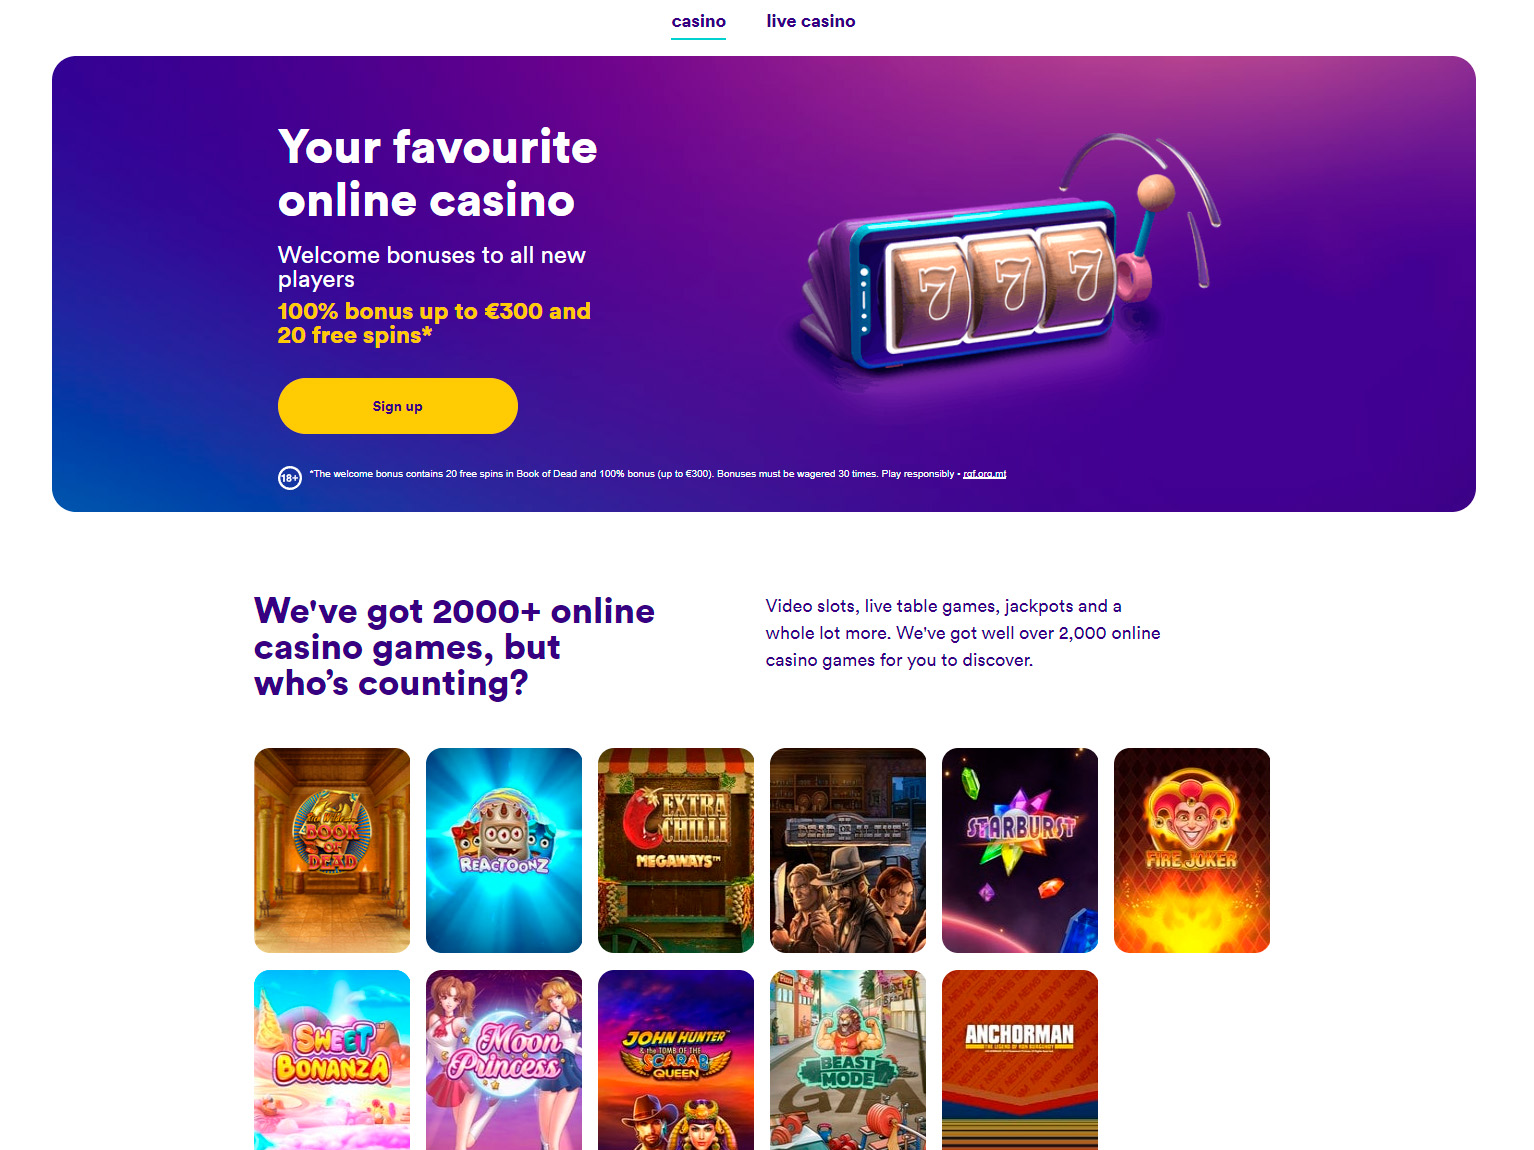 Now pick up 200 free spins on the slot by starting playing at Casumo online casino￼